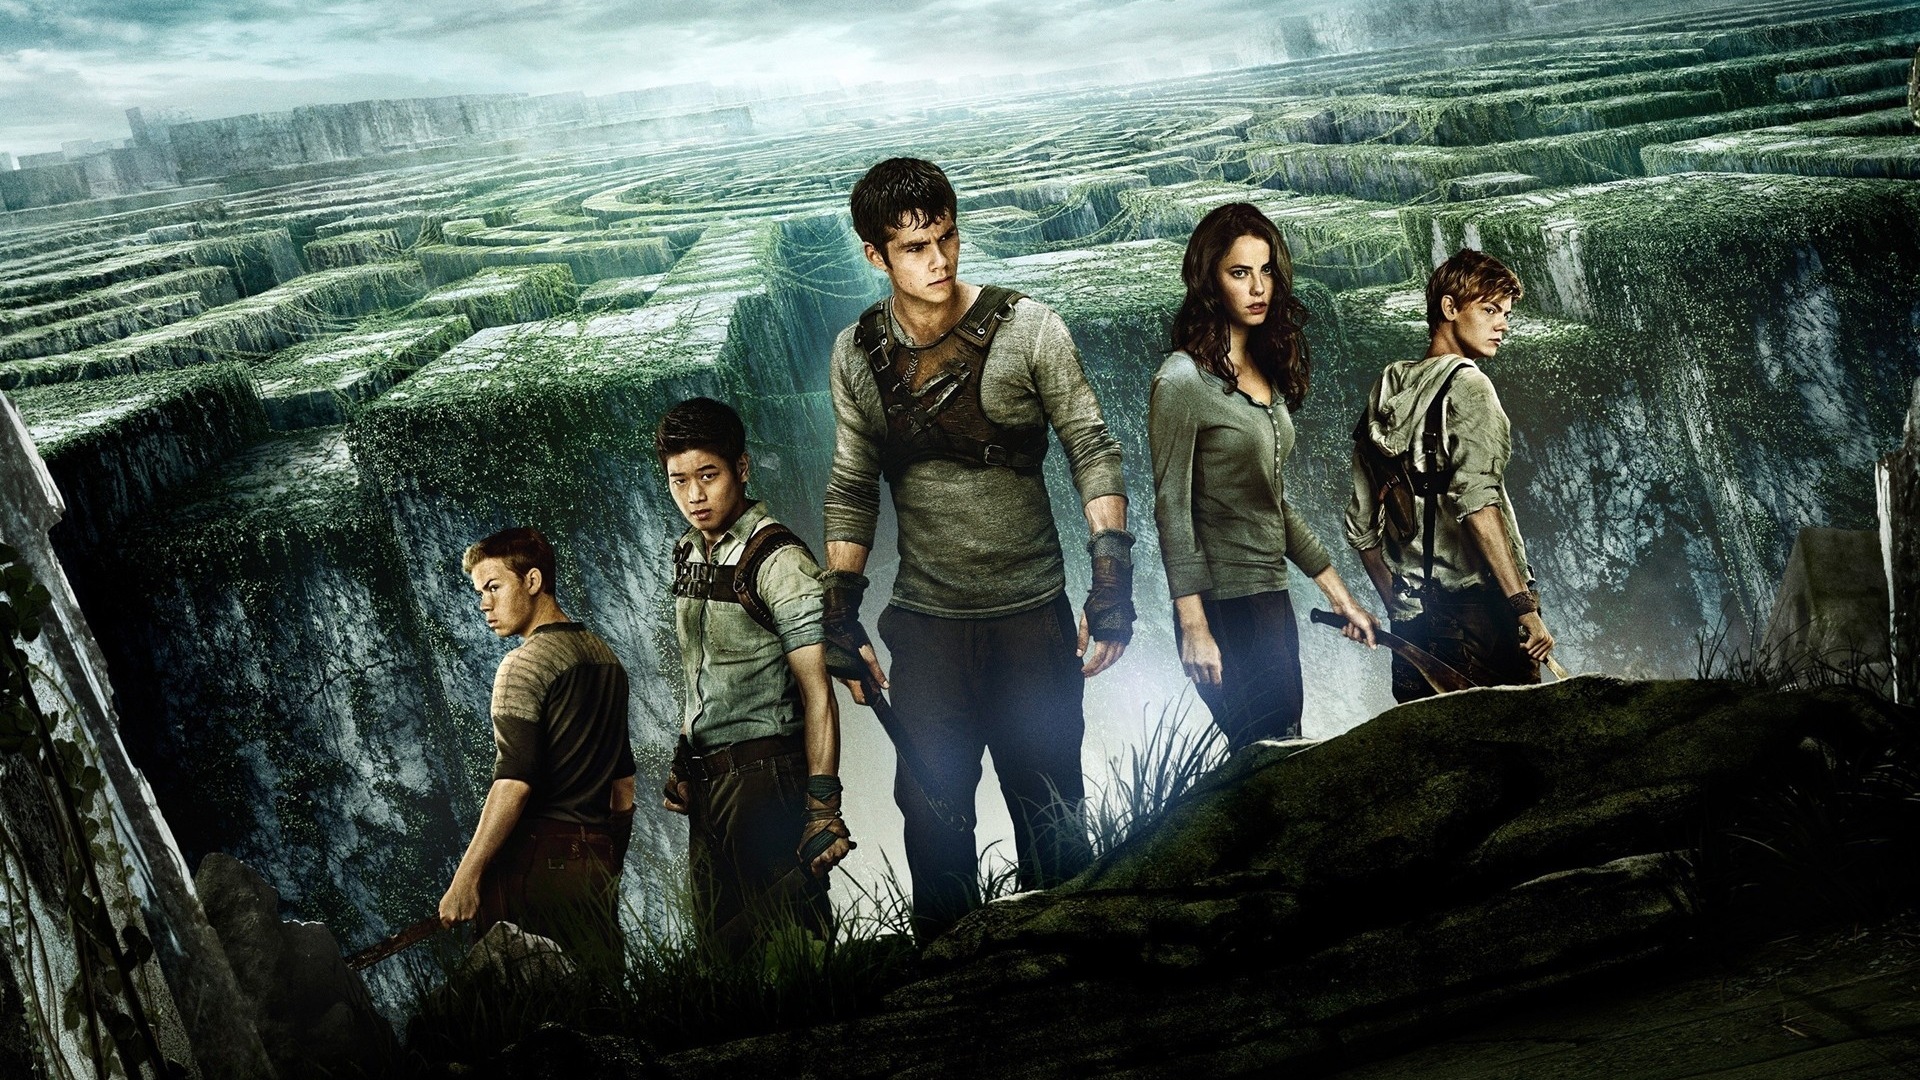 The Maze Runner HD movie wallpapers #1 - 1920x1080